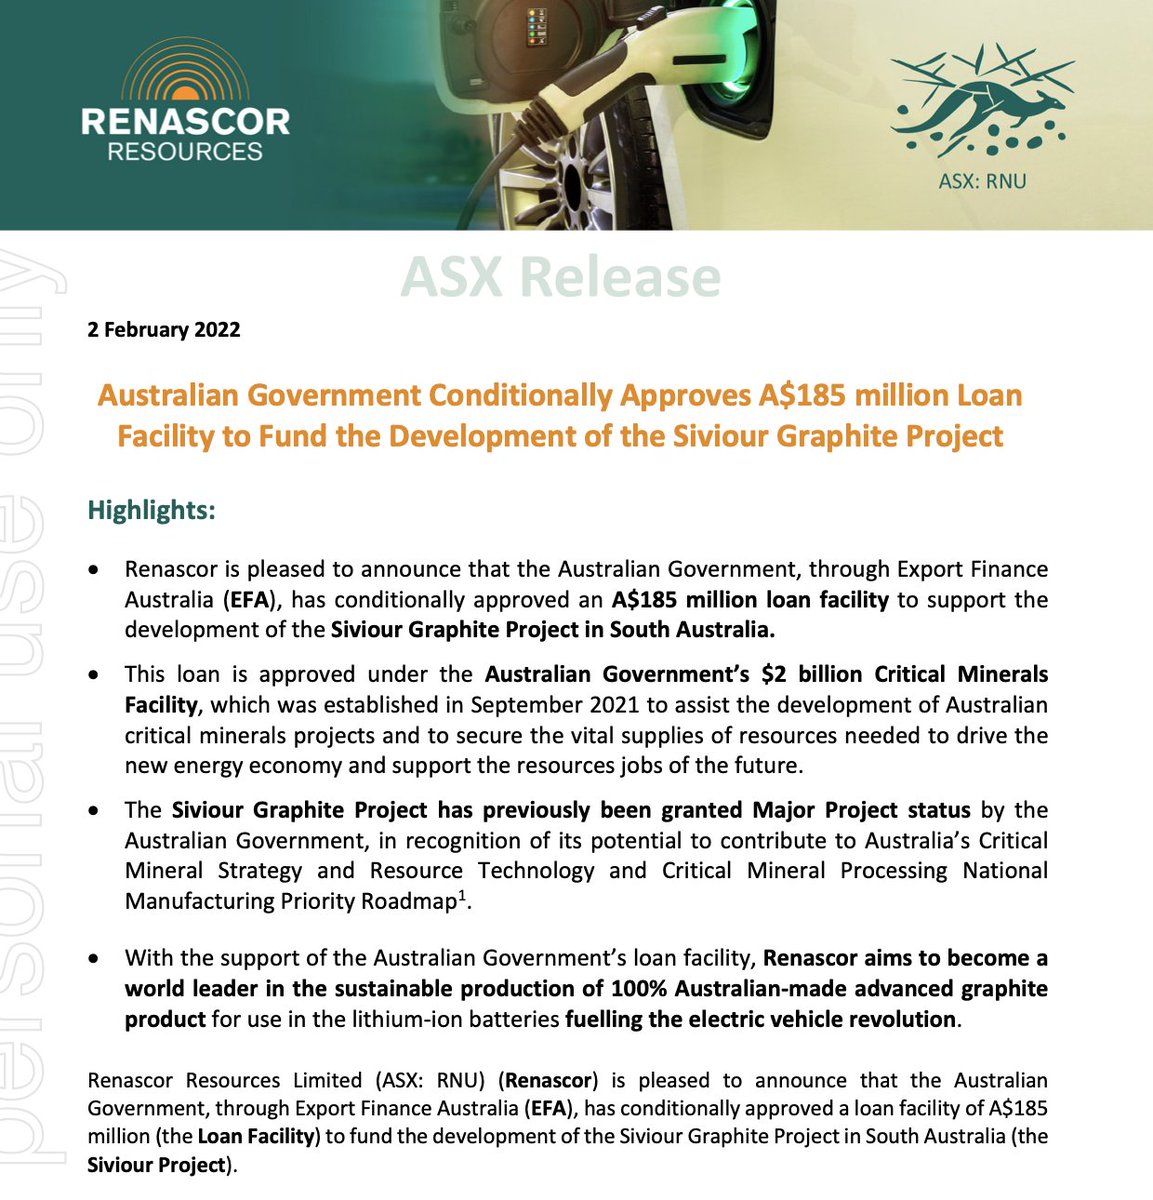 Australian Government conditionally approves A$185 million loan facility to fund #Renascor’s Siviour #Battery #Anode material project in South Australia. 100% #Australianmade Purified Spherical #Graphite. #criticalminerals #ESGinvesting #CleanEnergy #Sustainability #HFfree $RNU